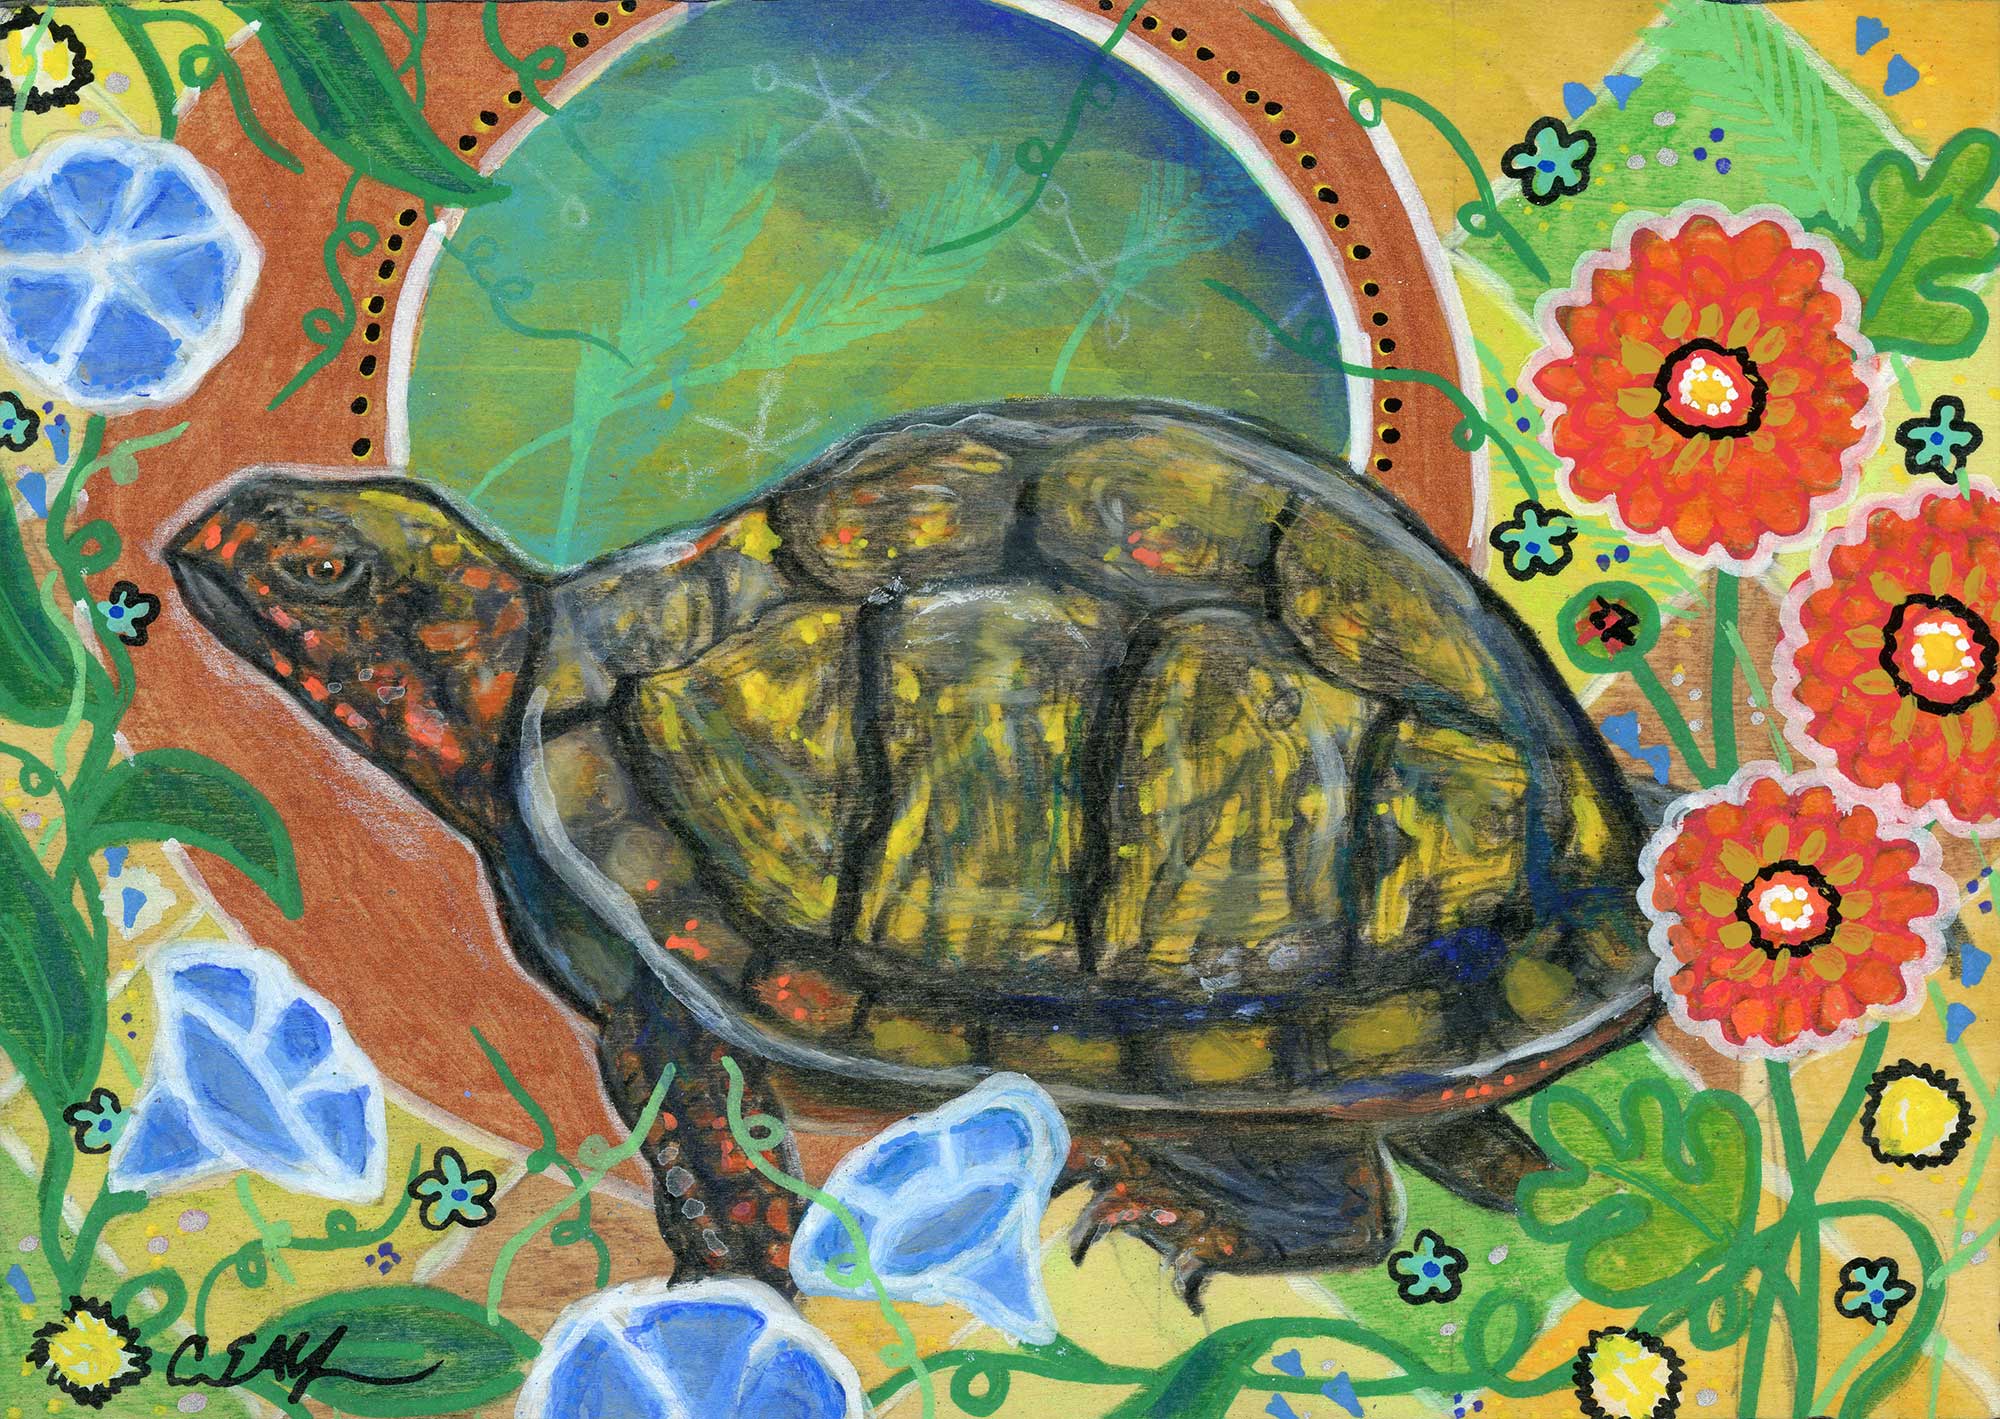 SOLD - "Box Turtle", 7" x 5", mixed media